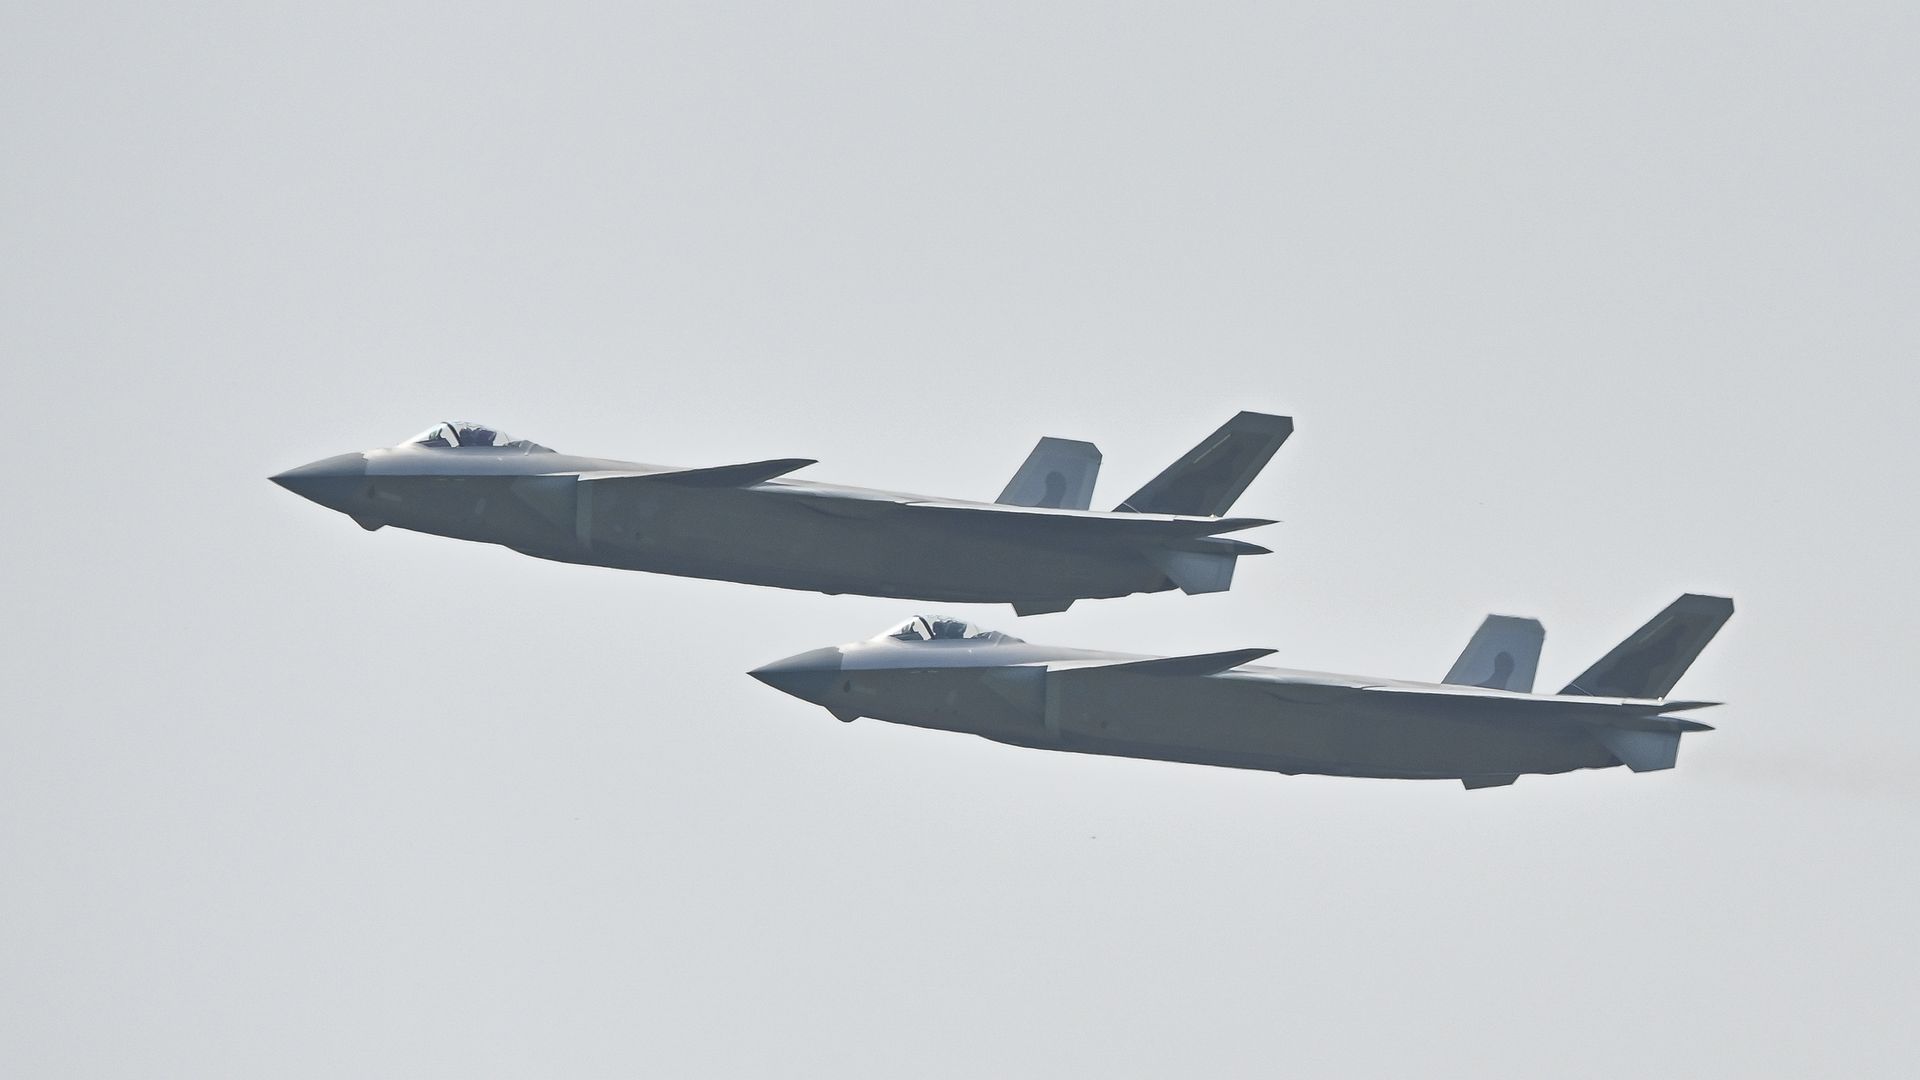 Two J-20 stealth fighter jets perform in the sky during the 13th China International Aviation and Aerospace Exhibition on September 29, 2021 in Zhuhai, Guangdong Province of China